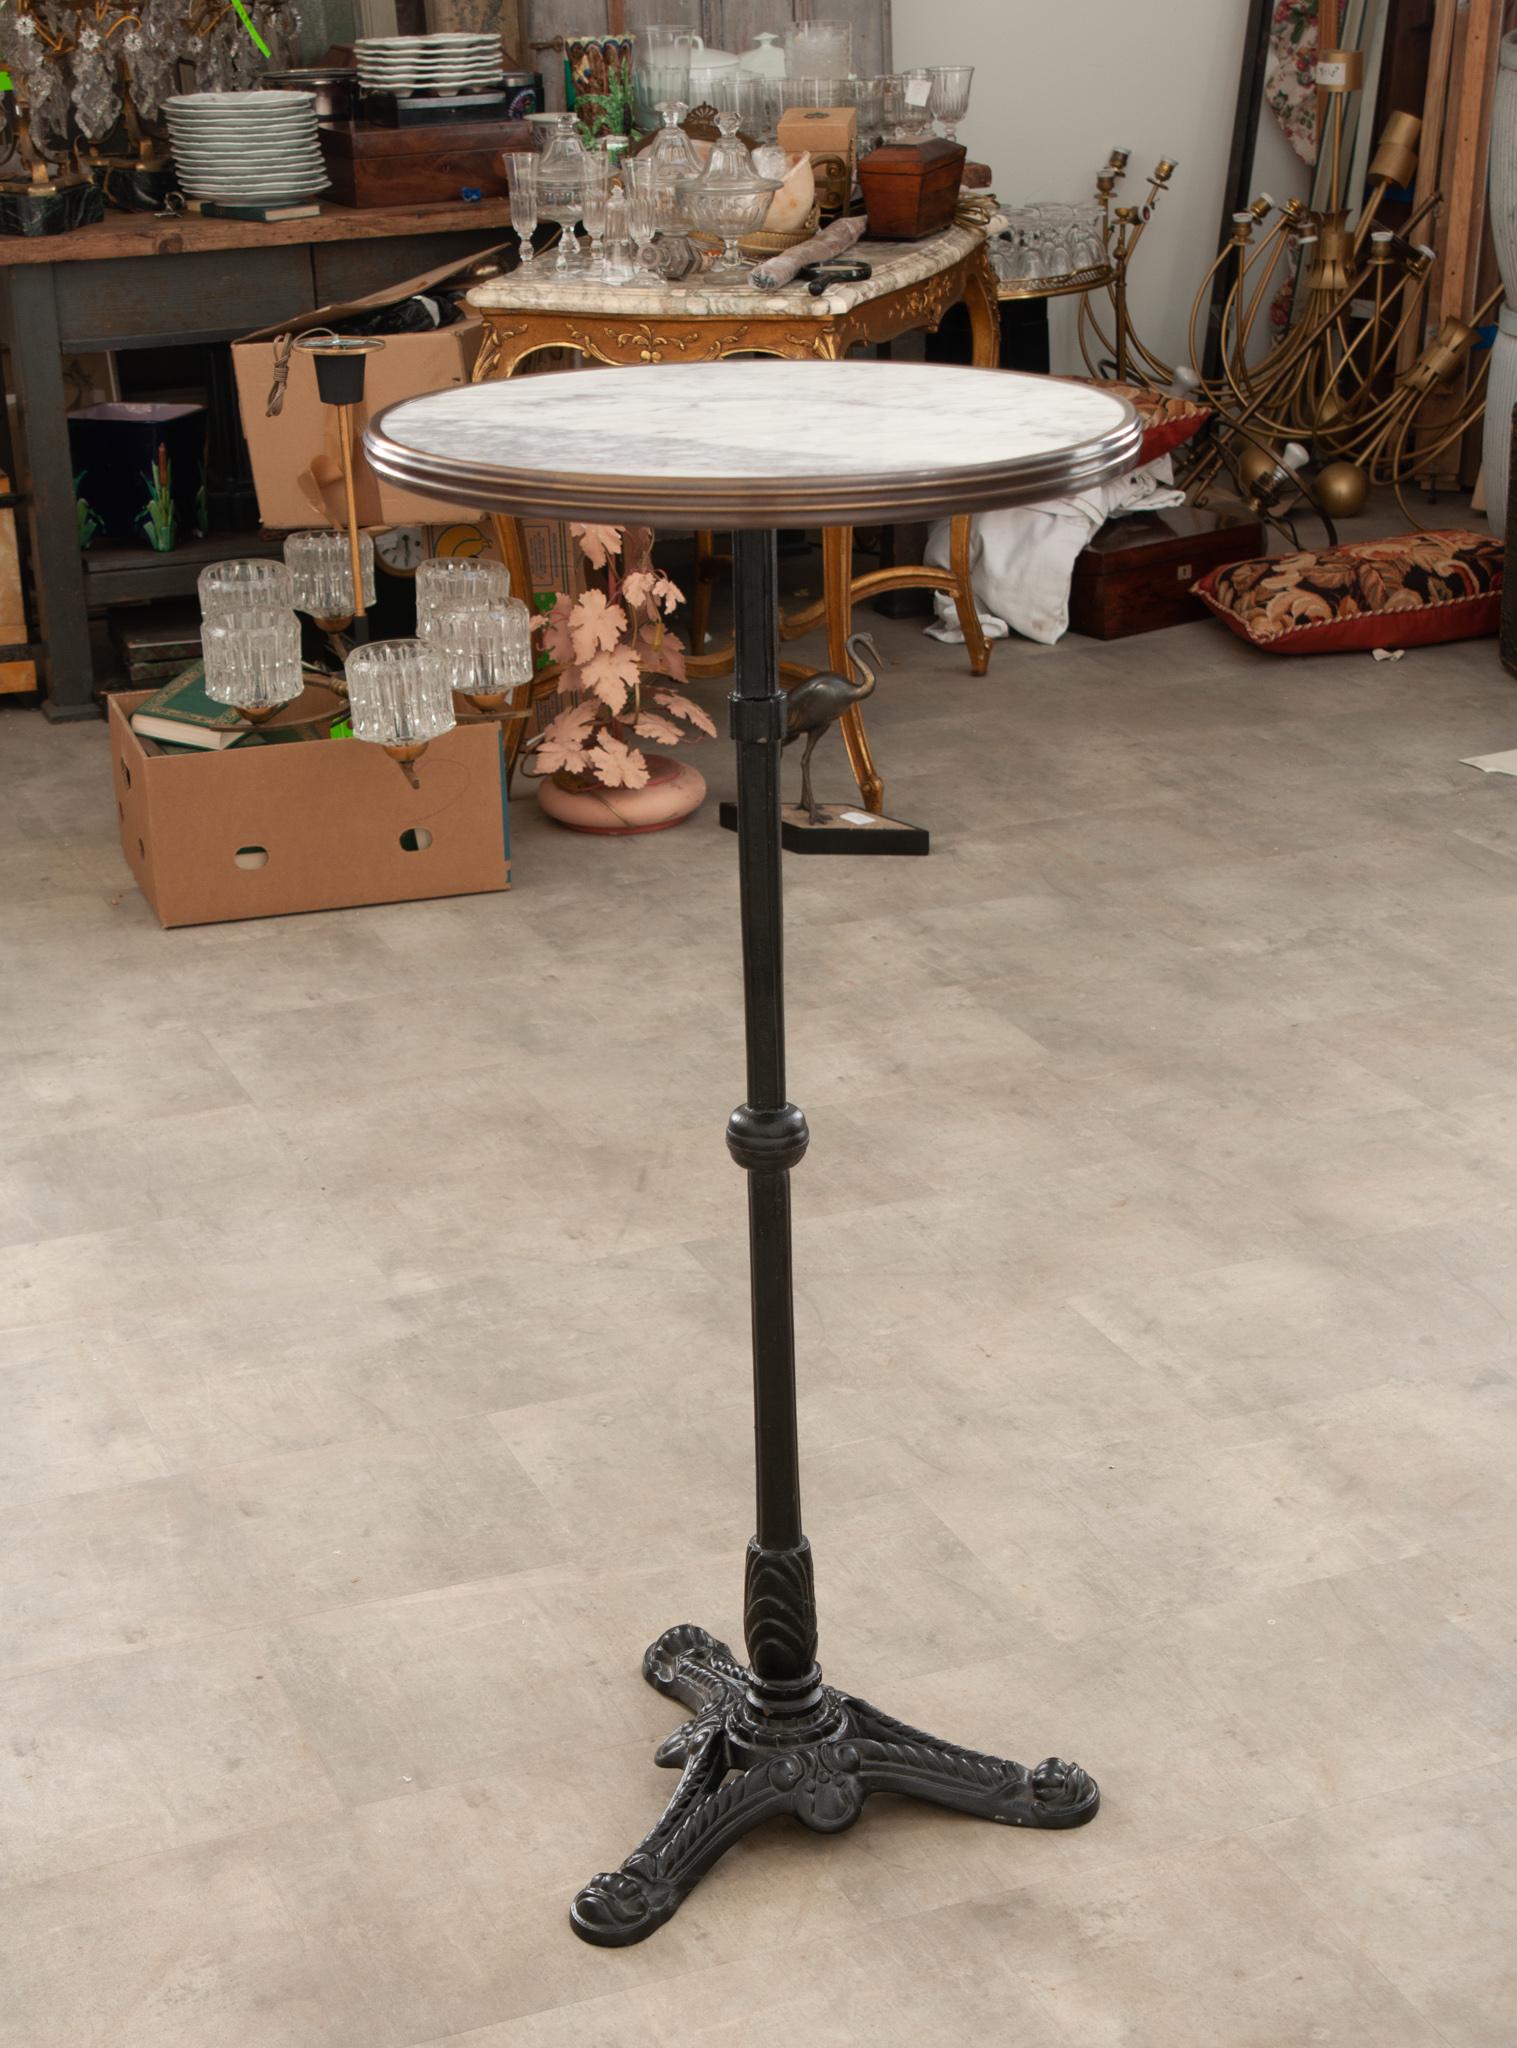 This classically designed bistro bar table is the perfect way to elevate any small dining space or bar room. Originally made popular during Paris’ Belle Époque, marble bistro tables such as this one, continue to be used in restaurants and bistros